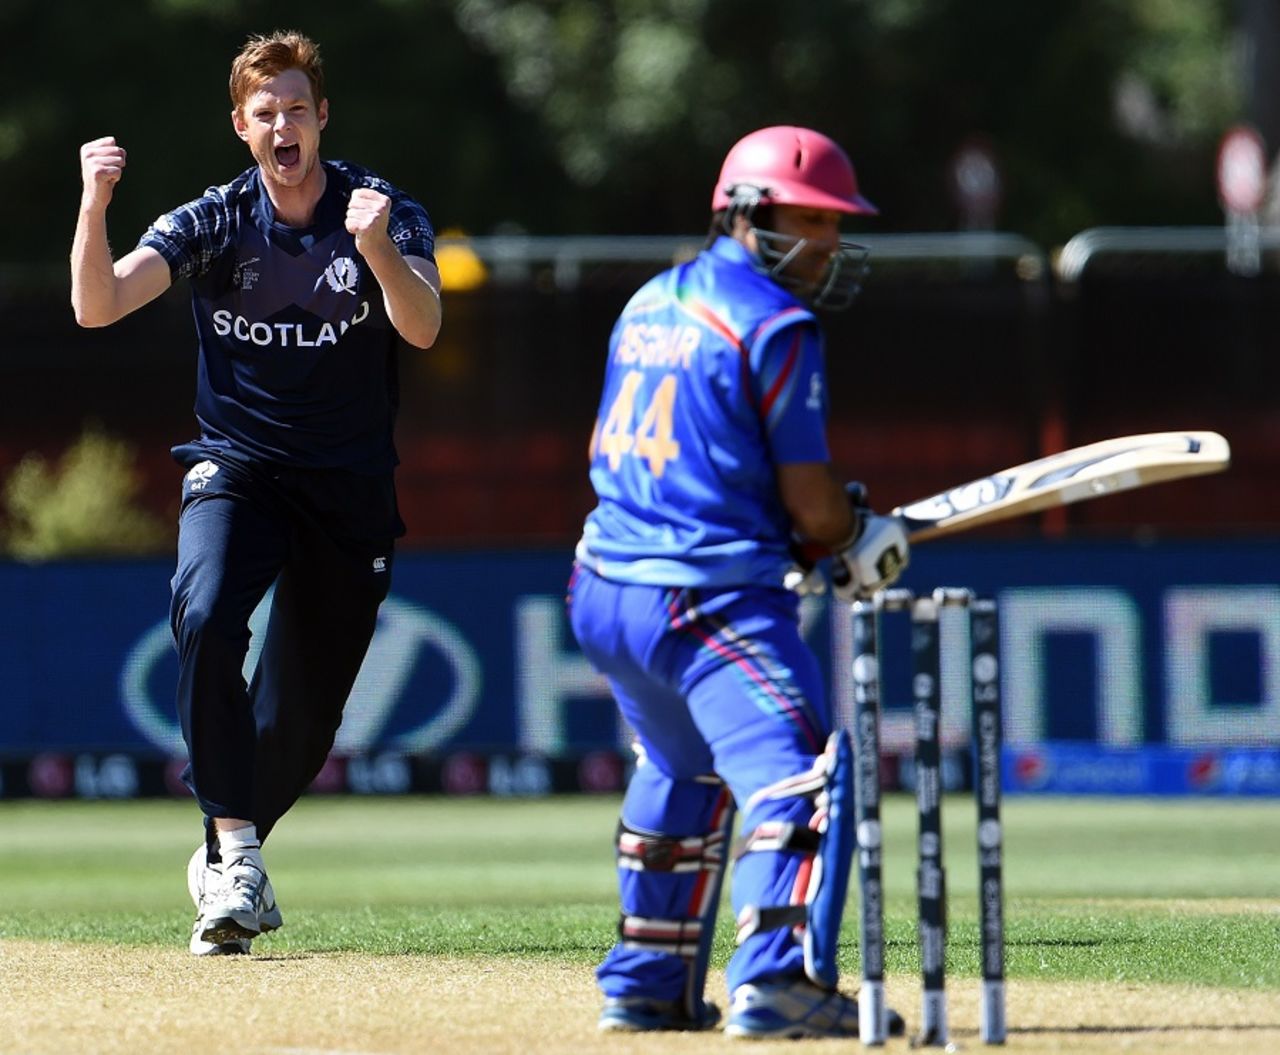 Alasdair Evans is delighted after having Asghar Stanikzai caught behind, Afghanistan v Scotland, World Cup 2015, Group A, Dunedin, February 26, 2015 